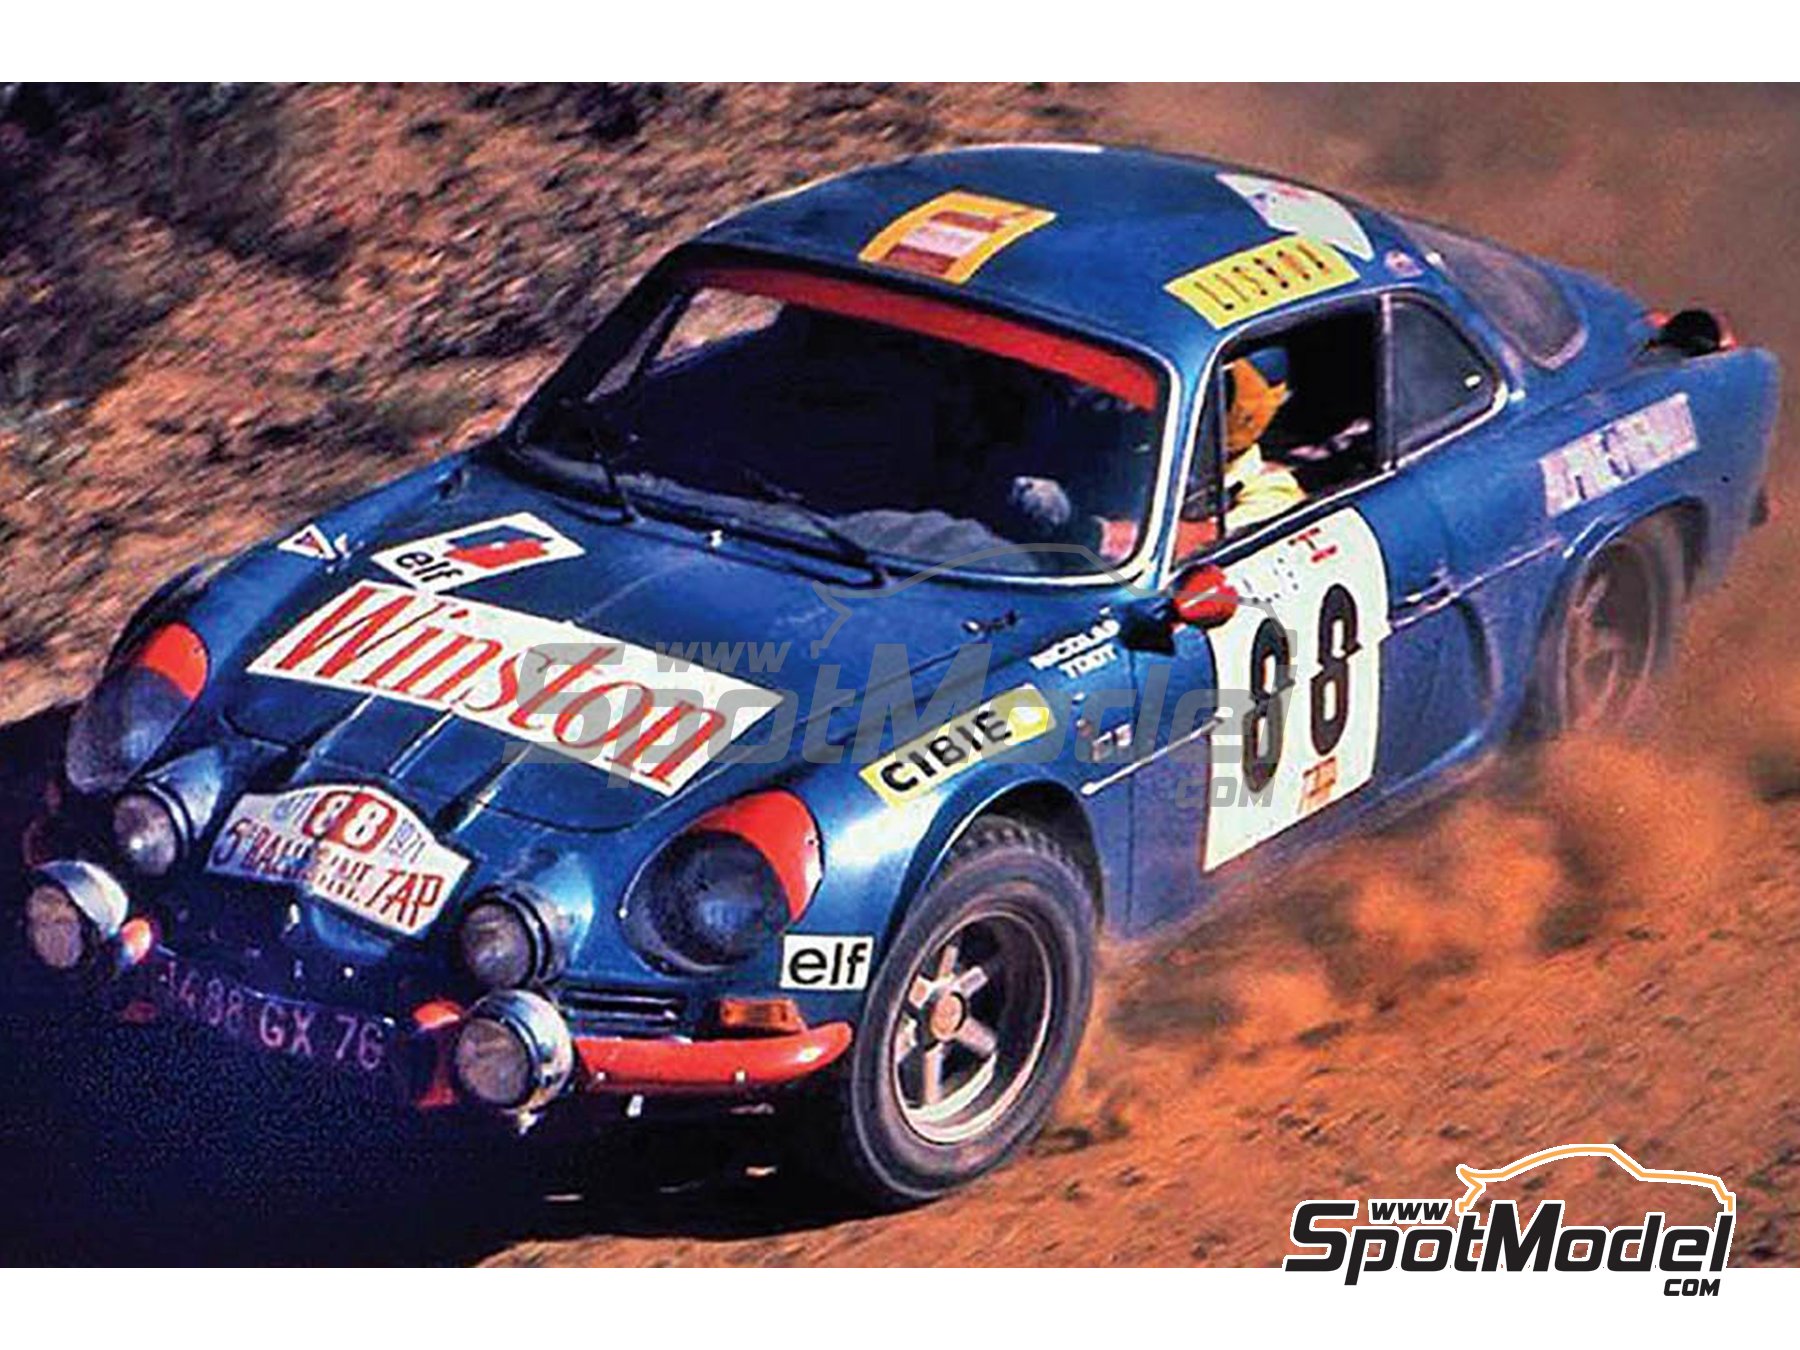 Decals 1/18 ref 559 alpine renault a110 therier 1973 rallye acropolis rally wrc 